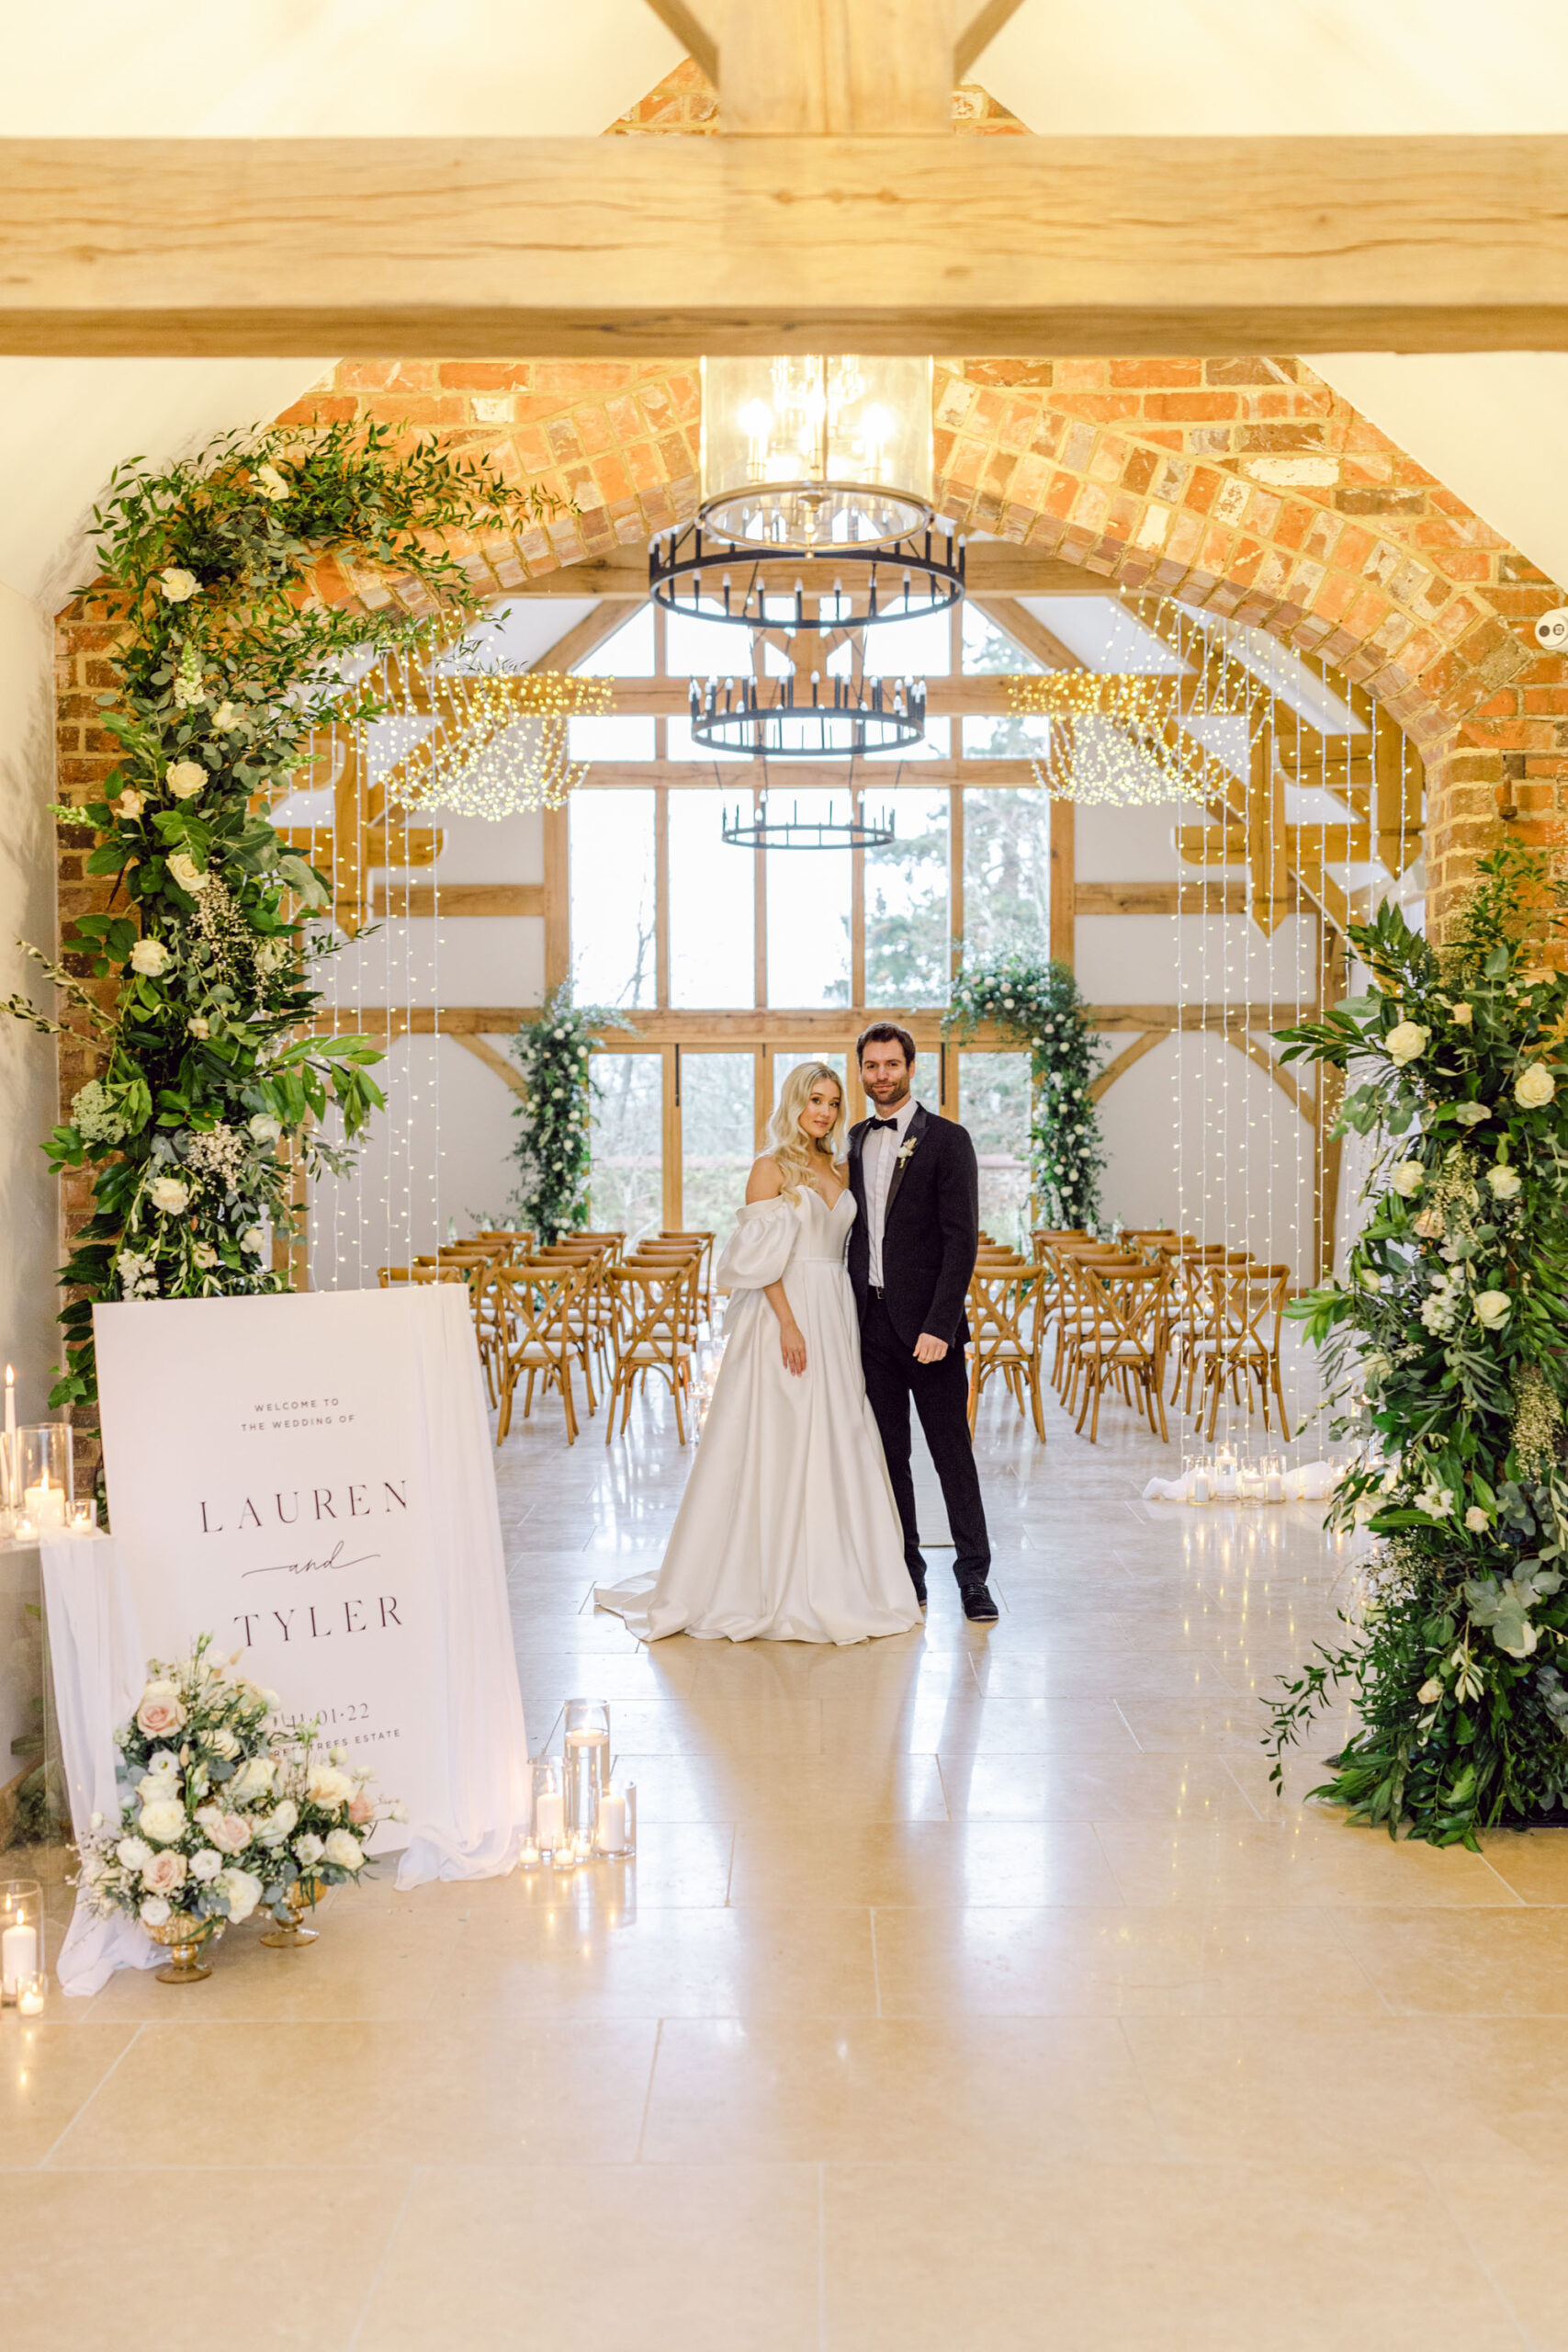 Luxe wedding editorial with blush and white British botanicals. Image credit Natalie D Photography